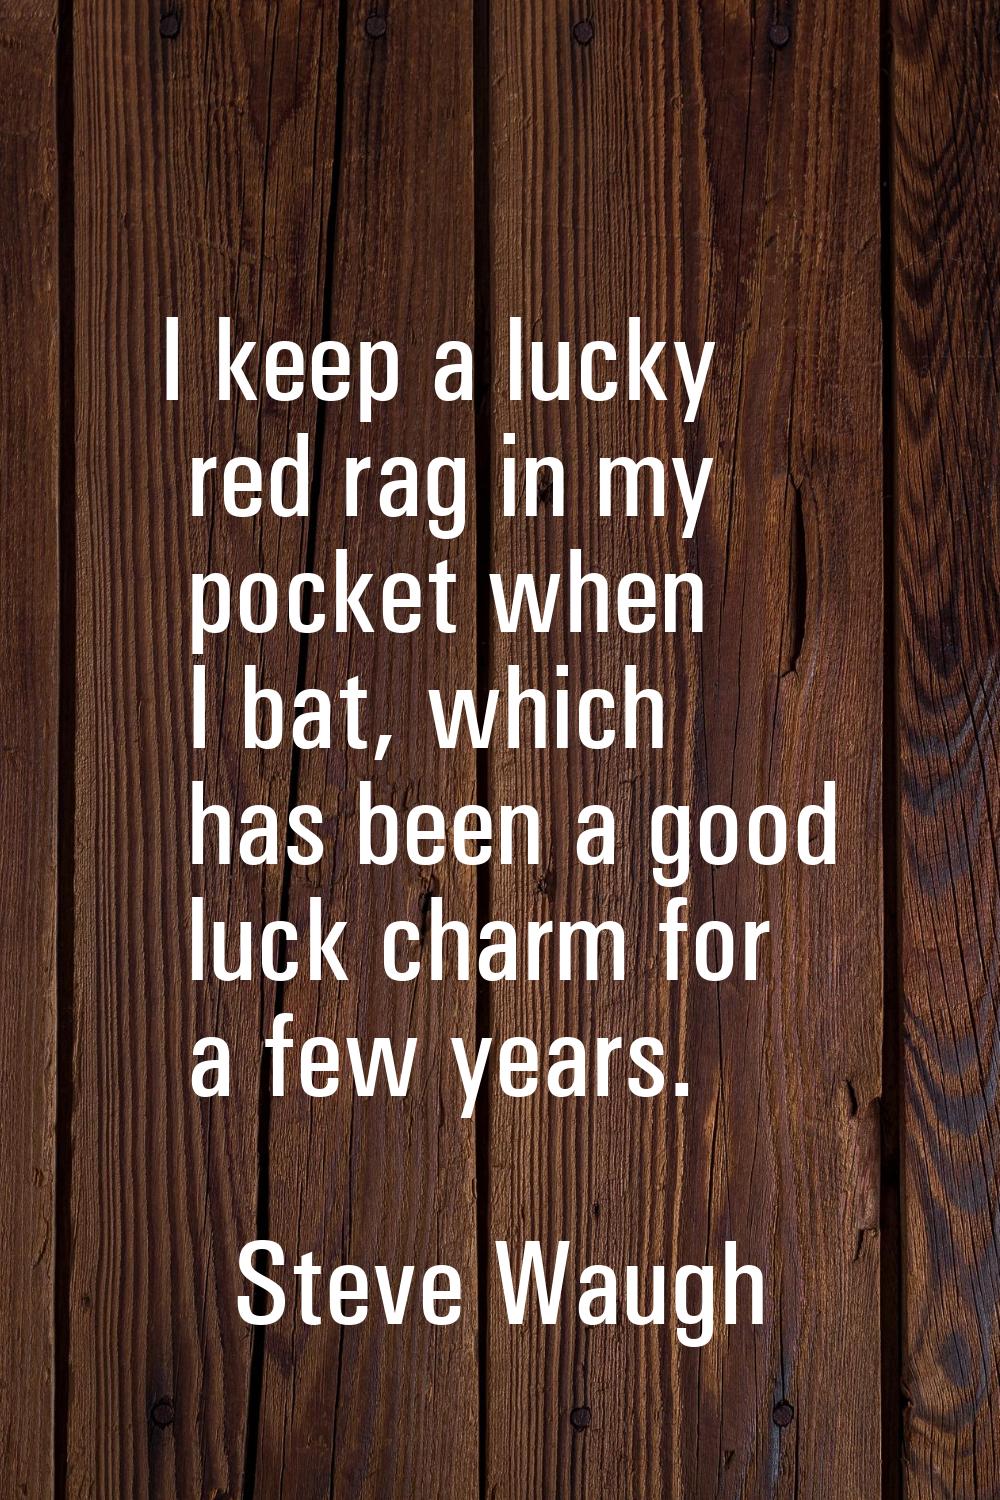 I keep a lucky red rag in my pocket when I bat, which has been a good luck charm for a few years.